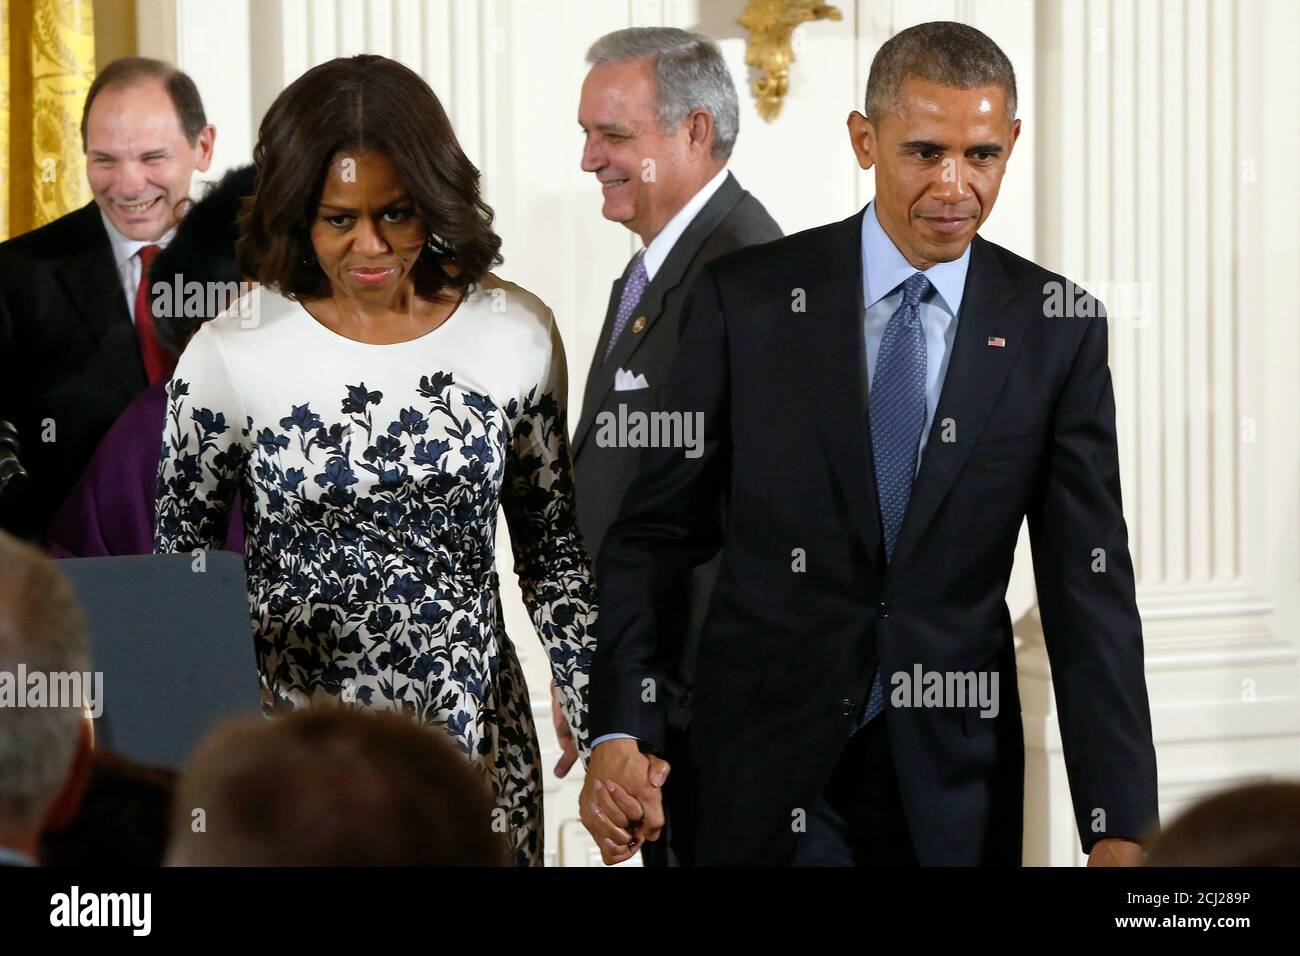 U.S. President Barack Obama and first lady Michelle Obama depart after a signing ceremony for the the Clay Hunt Suicide Prevention for American Veterans Act into law at the White House in Washington February 12, 2015. The bill is named after Clay Hunt, a Marine who committed suicide in 2011, suffering from post-traumatic stress disorder (PTSD) after serving in Iraq and Afghanistan.   REUTERS/Jonathan Ernst  (UNITED STATES - Tags: POLITICS MILITARY HEALTH) Stock Photo